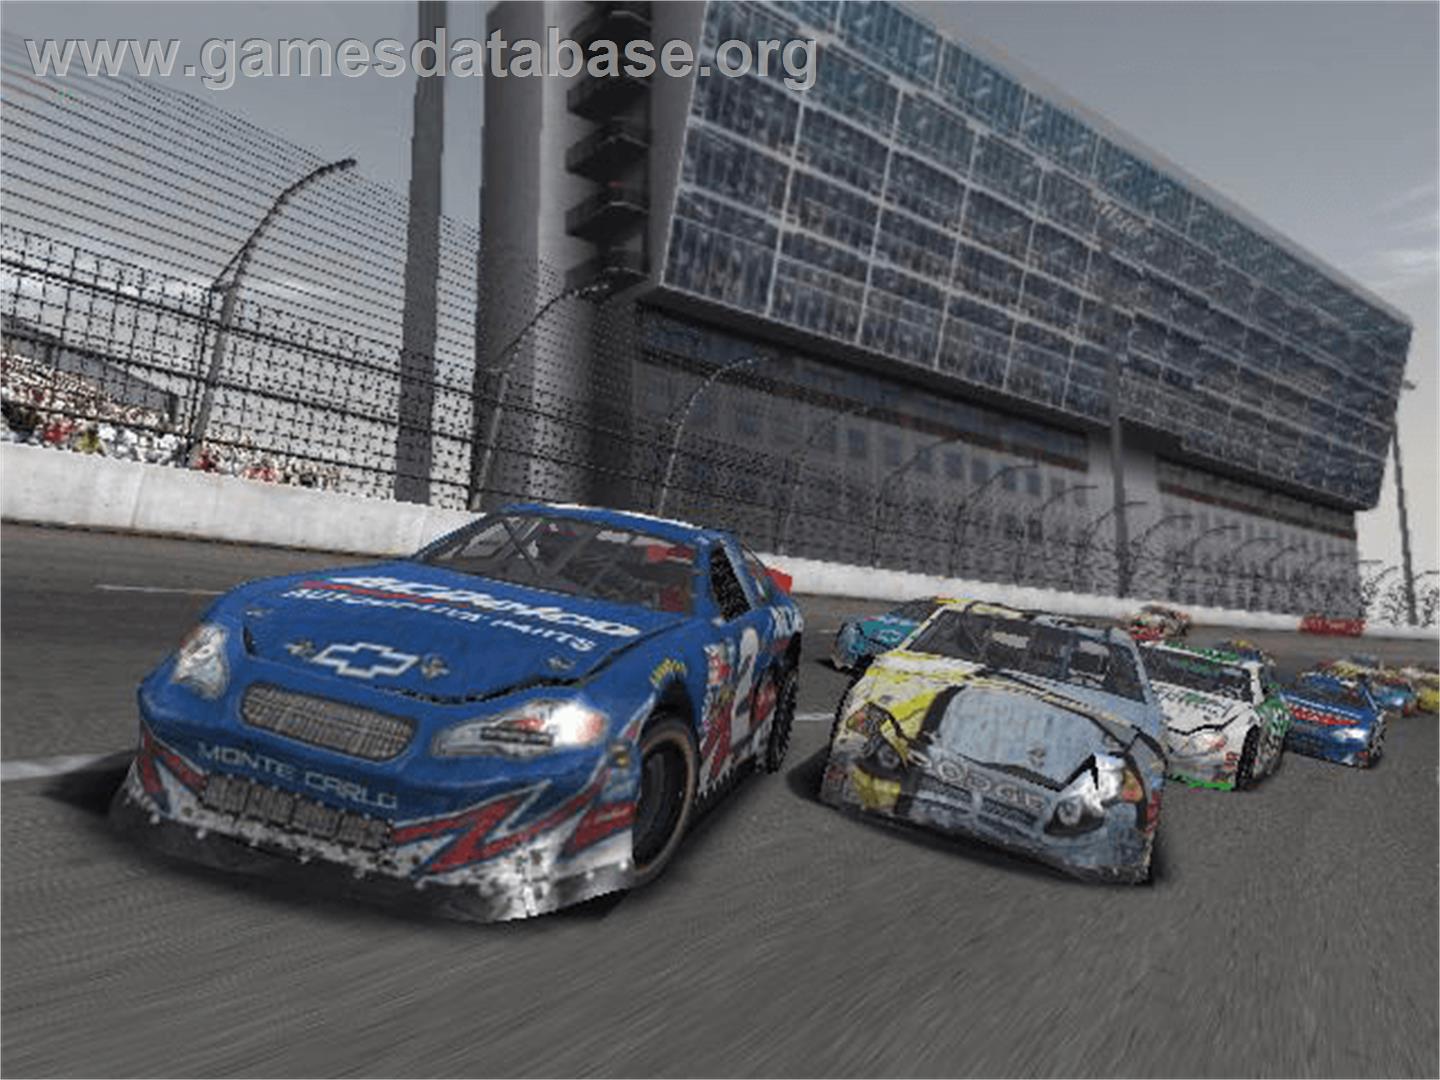 NASCAR 2005: Chase for the Cup - Microsoft Xbox - Artwork - In Game